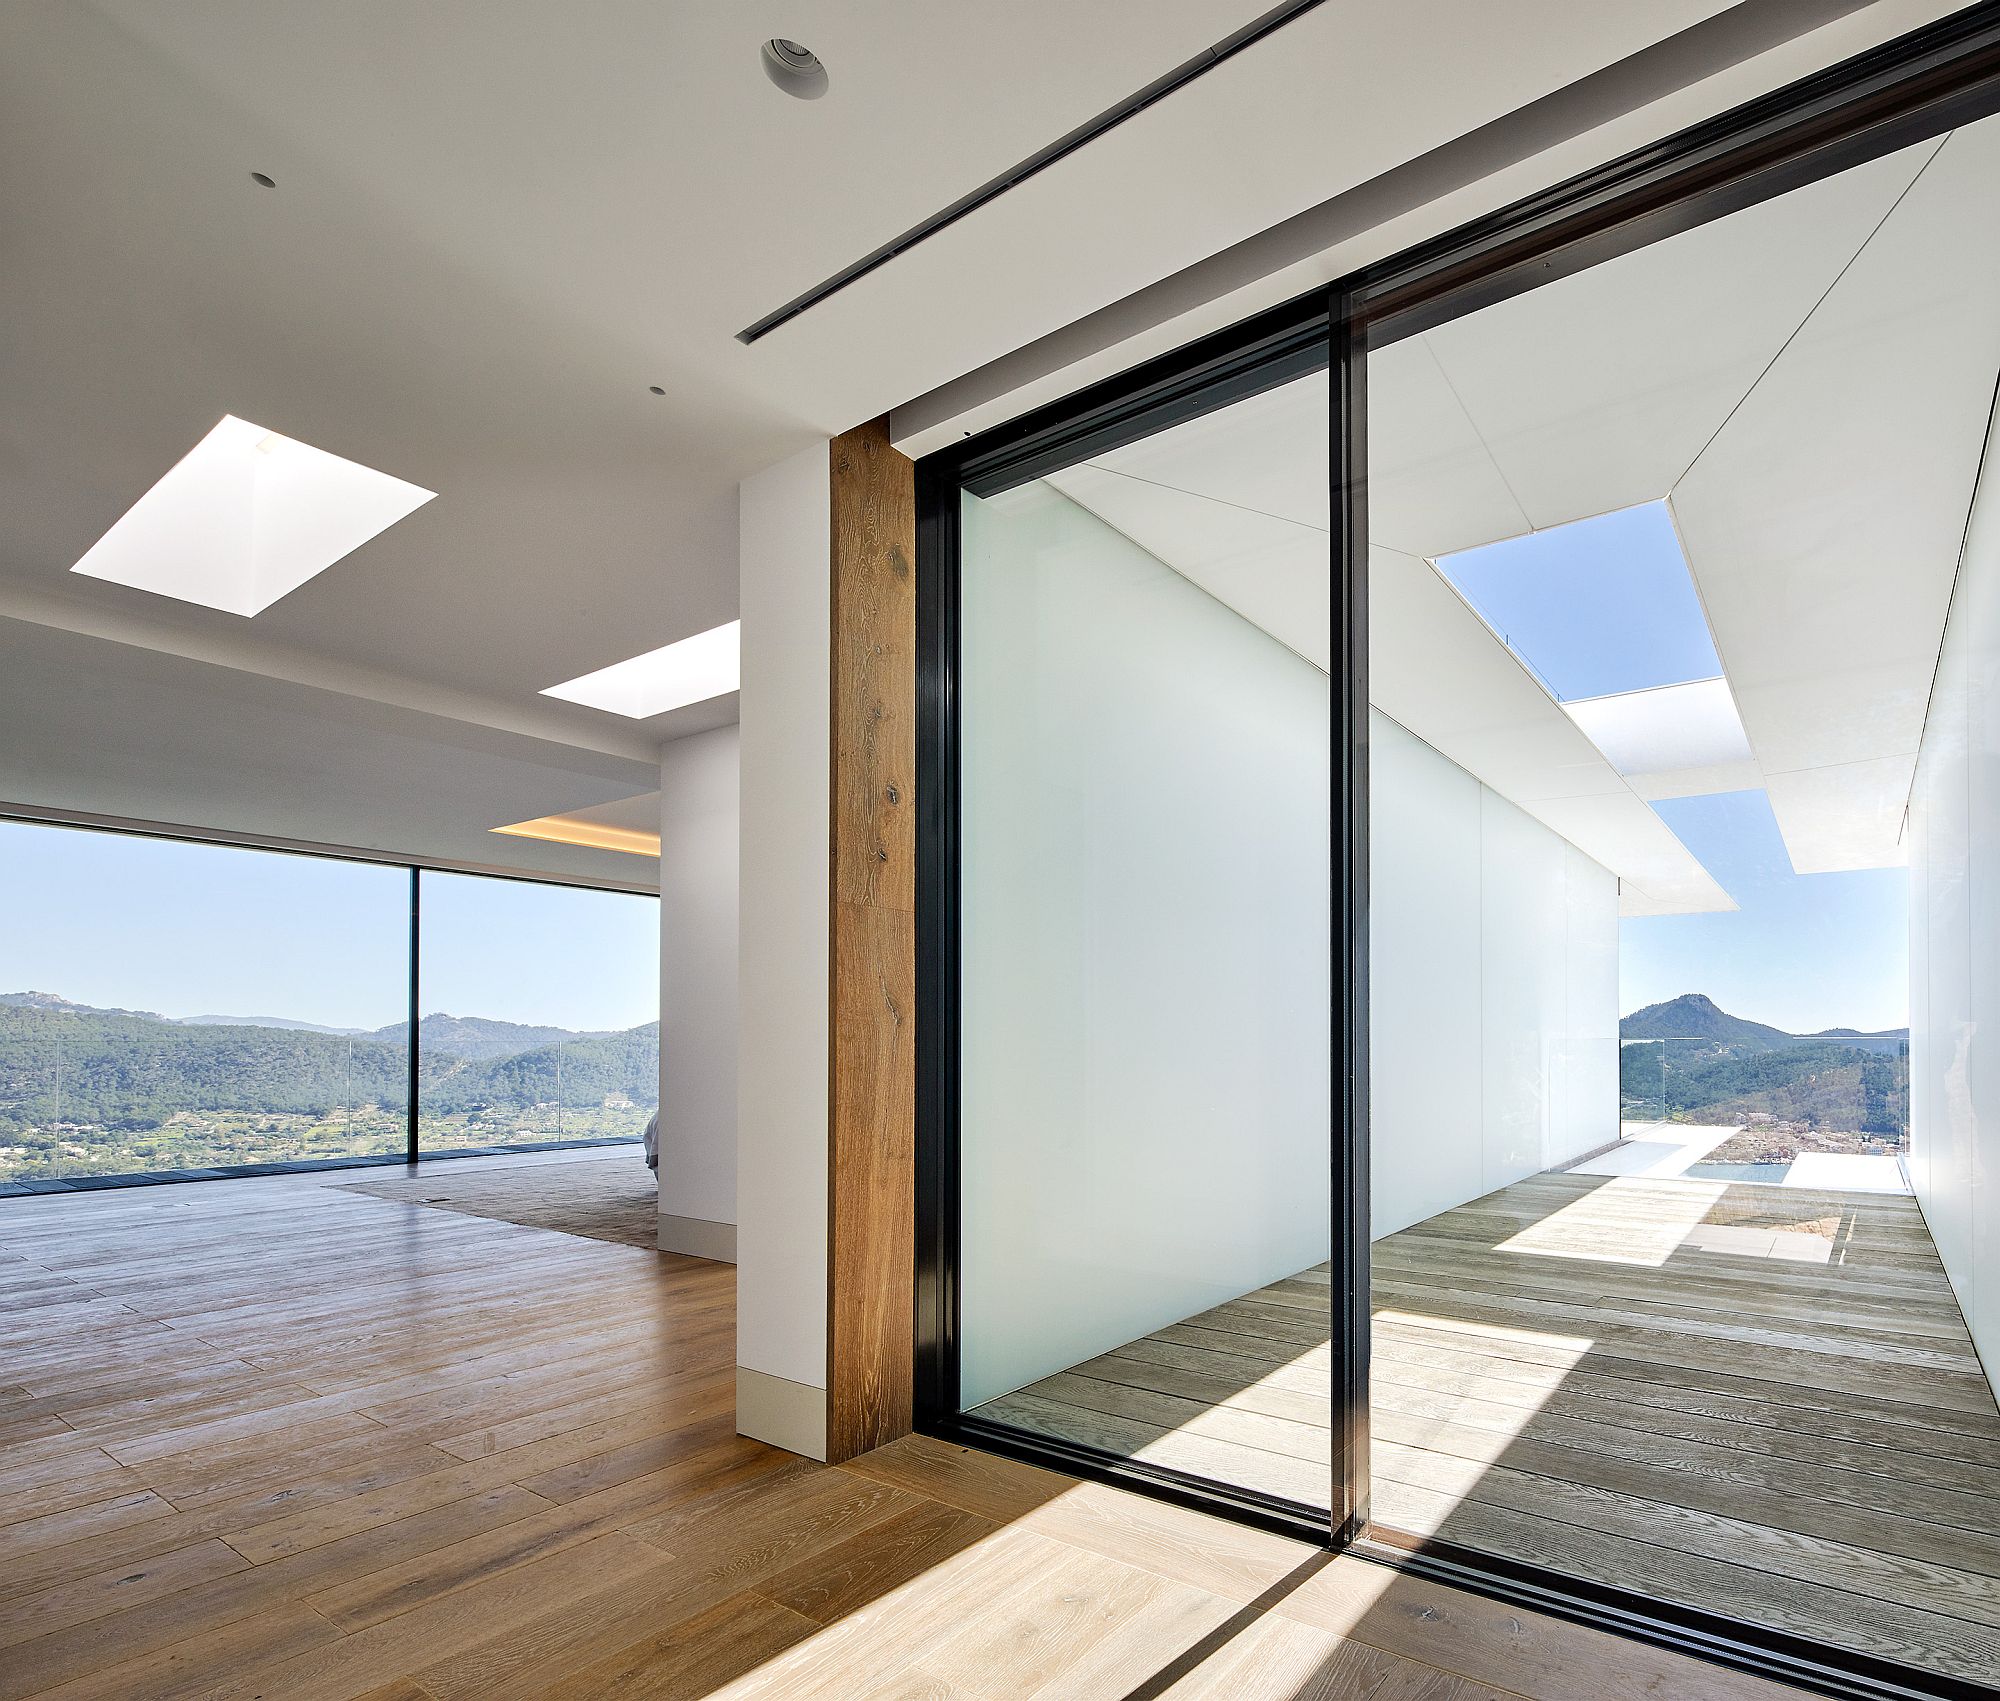 Skylights and large glass doors bring the outdoors inside